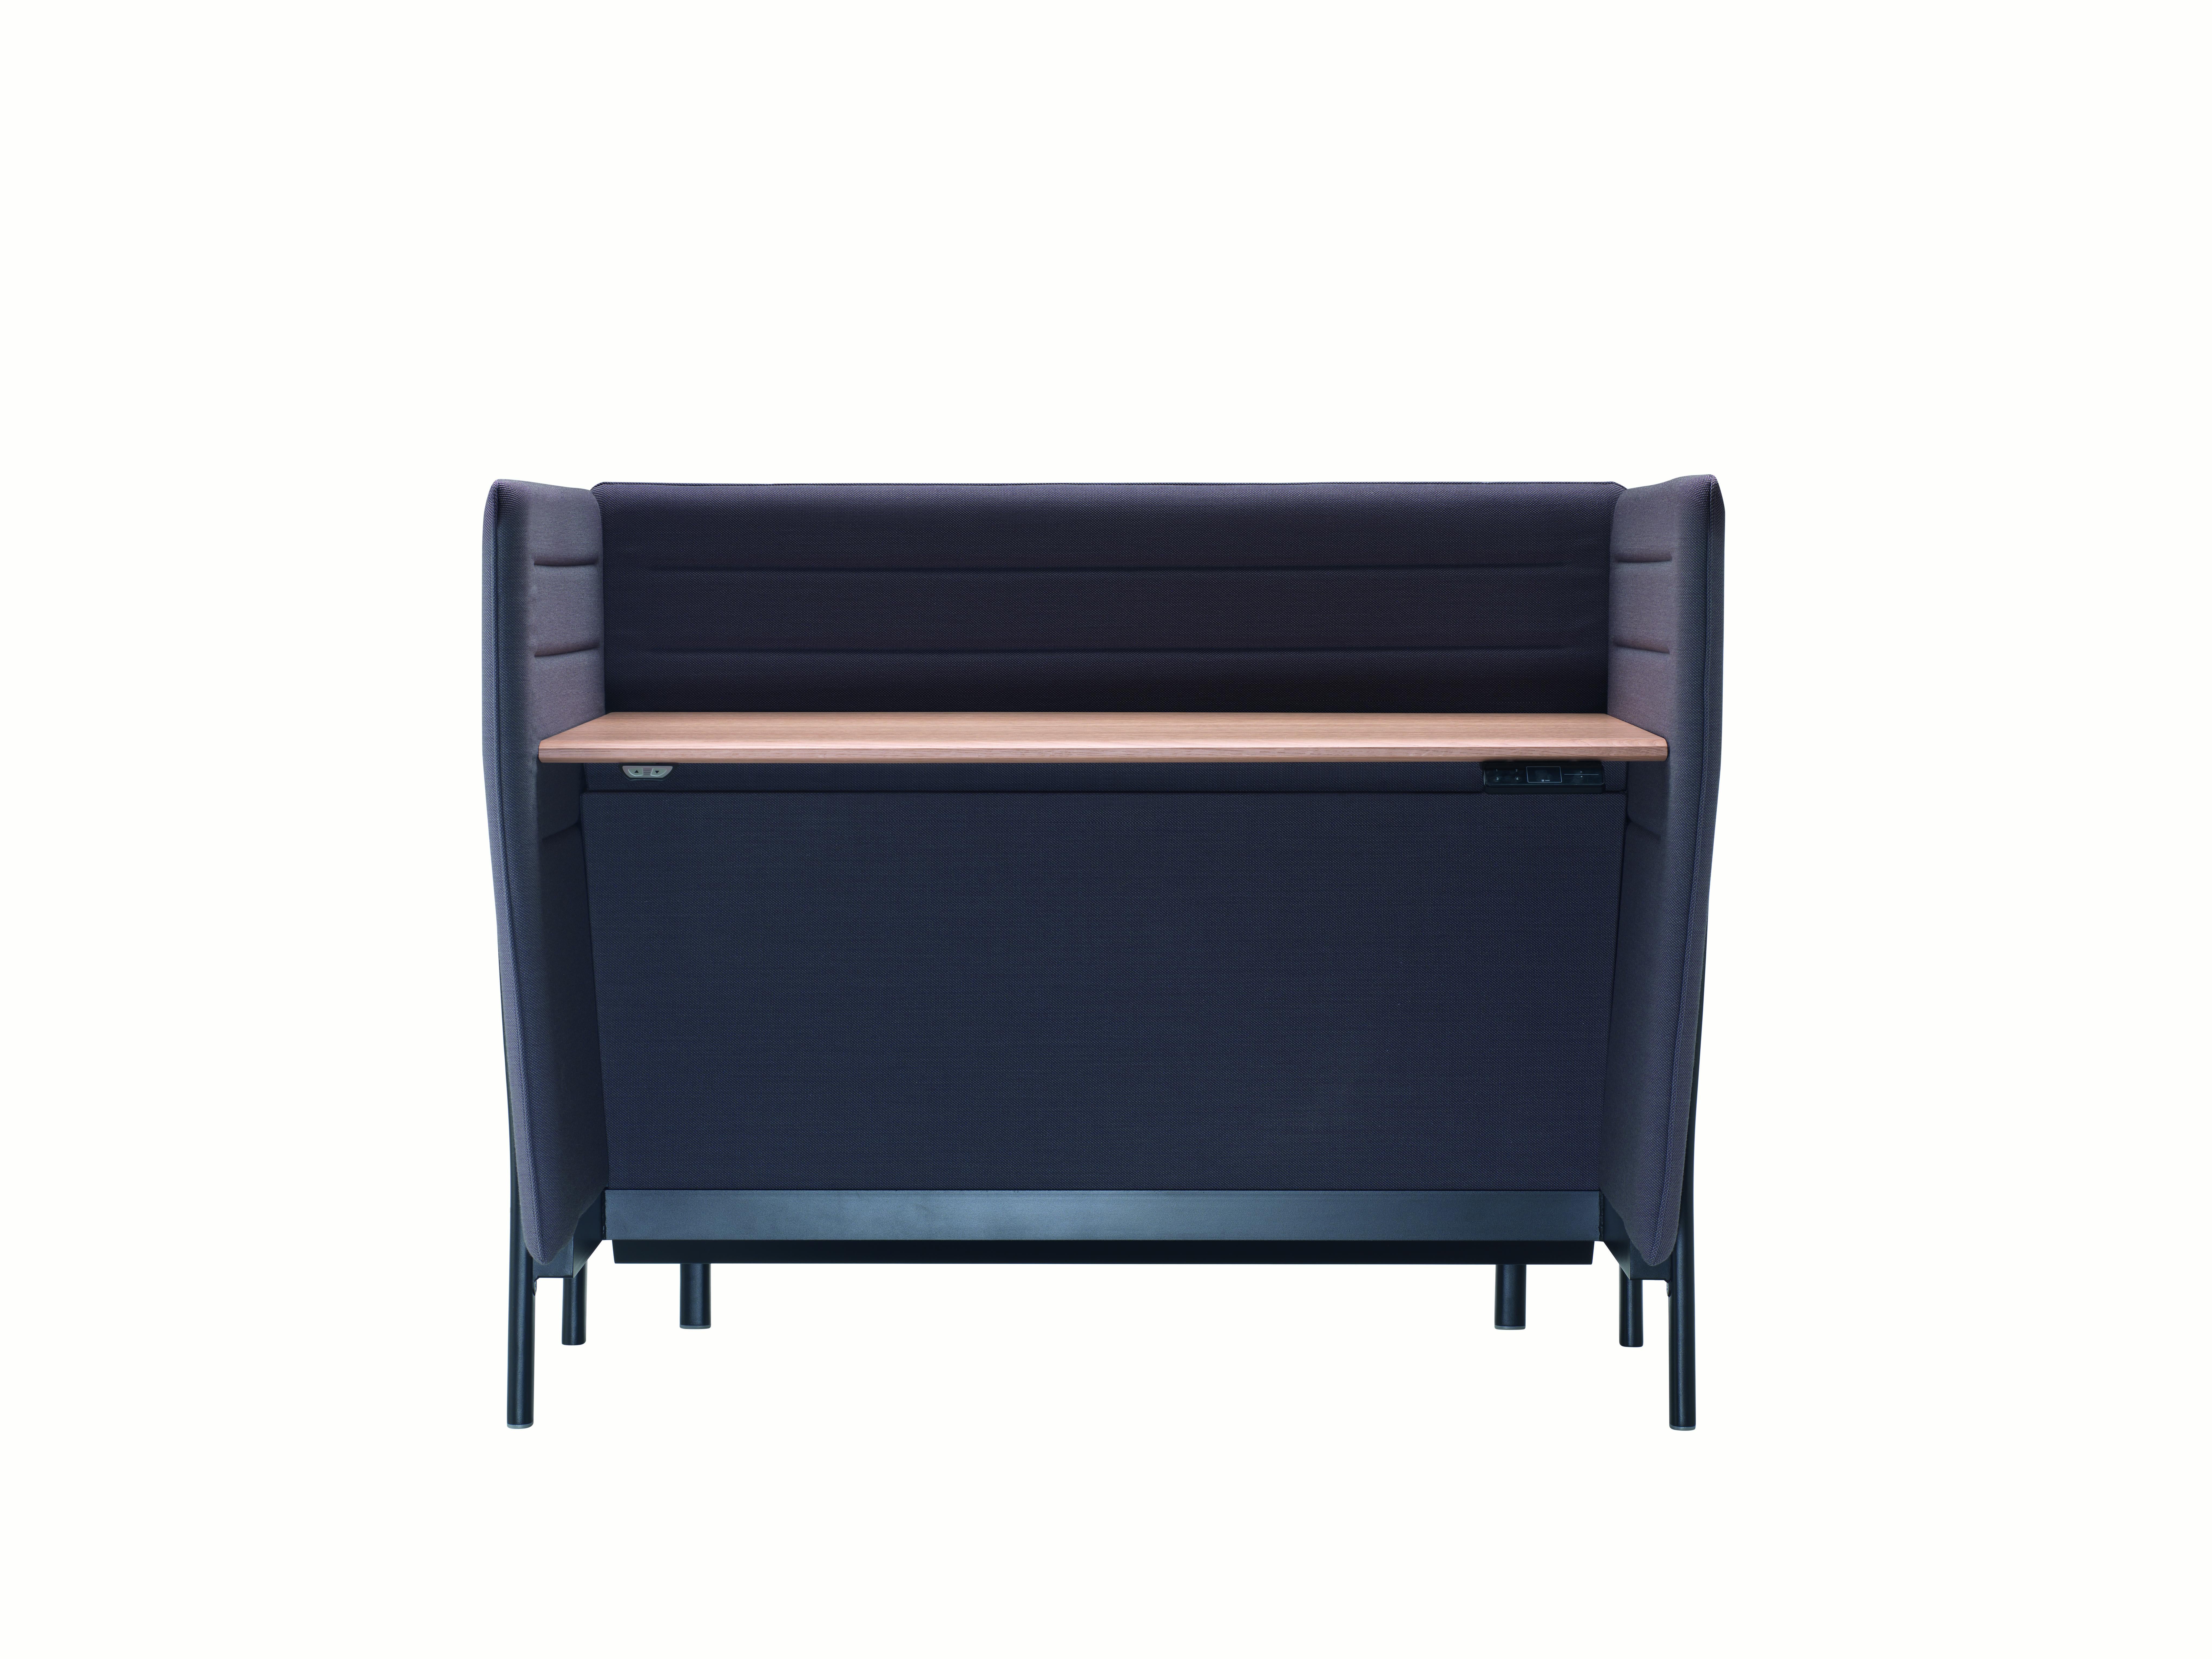 Alias 886 Small Eleven High Desk Adjustable with Oak Top and Upholstered Panels by PearsonLloyd

Desk. Structure with legs in die-cast aluminium and frame in steel lacquered or polished.Panels covered with fabric.Height adjustable top in MDF oak